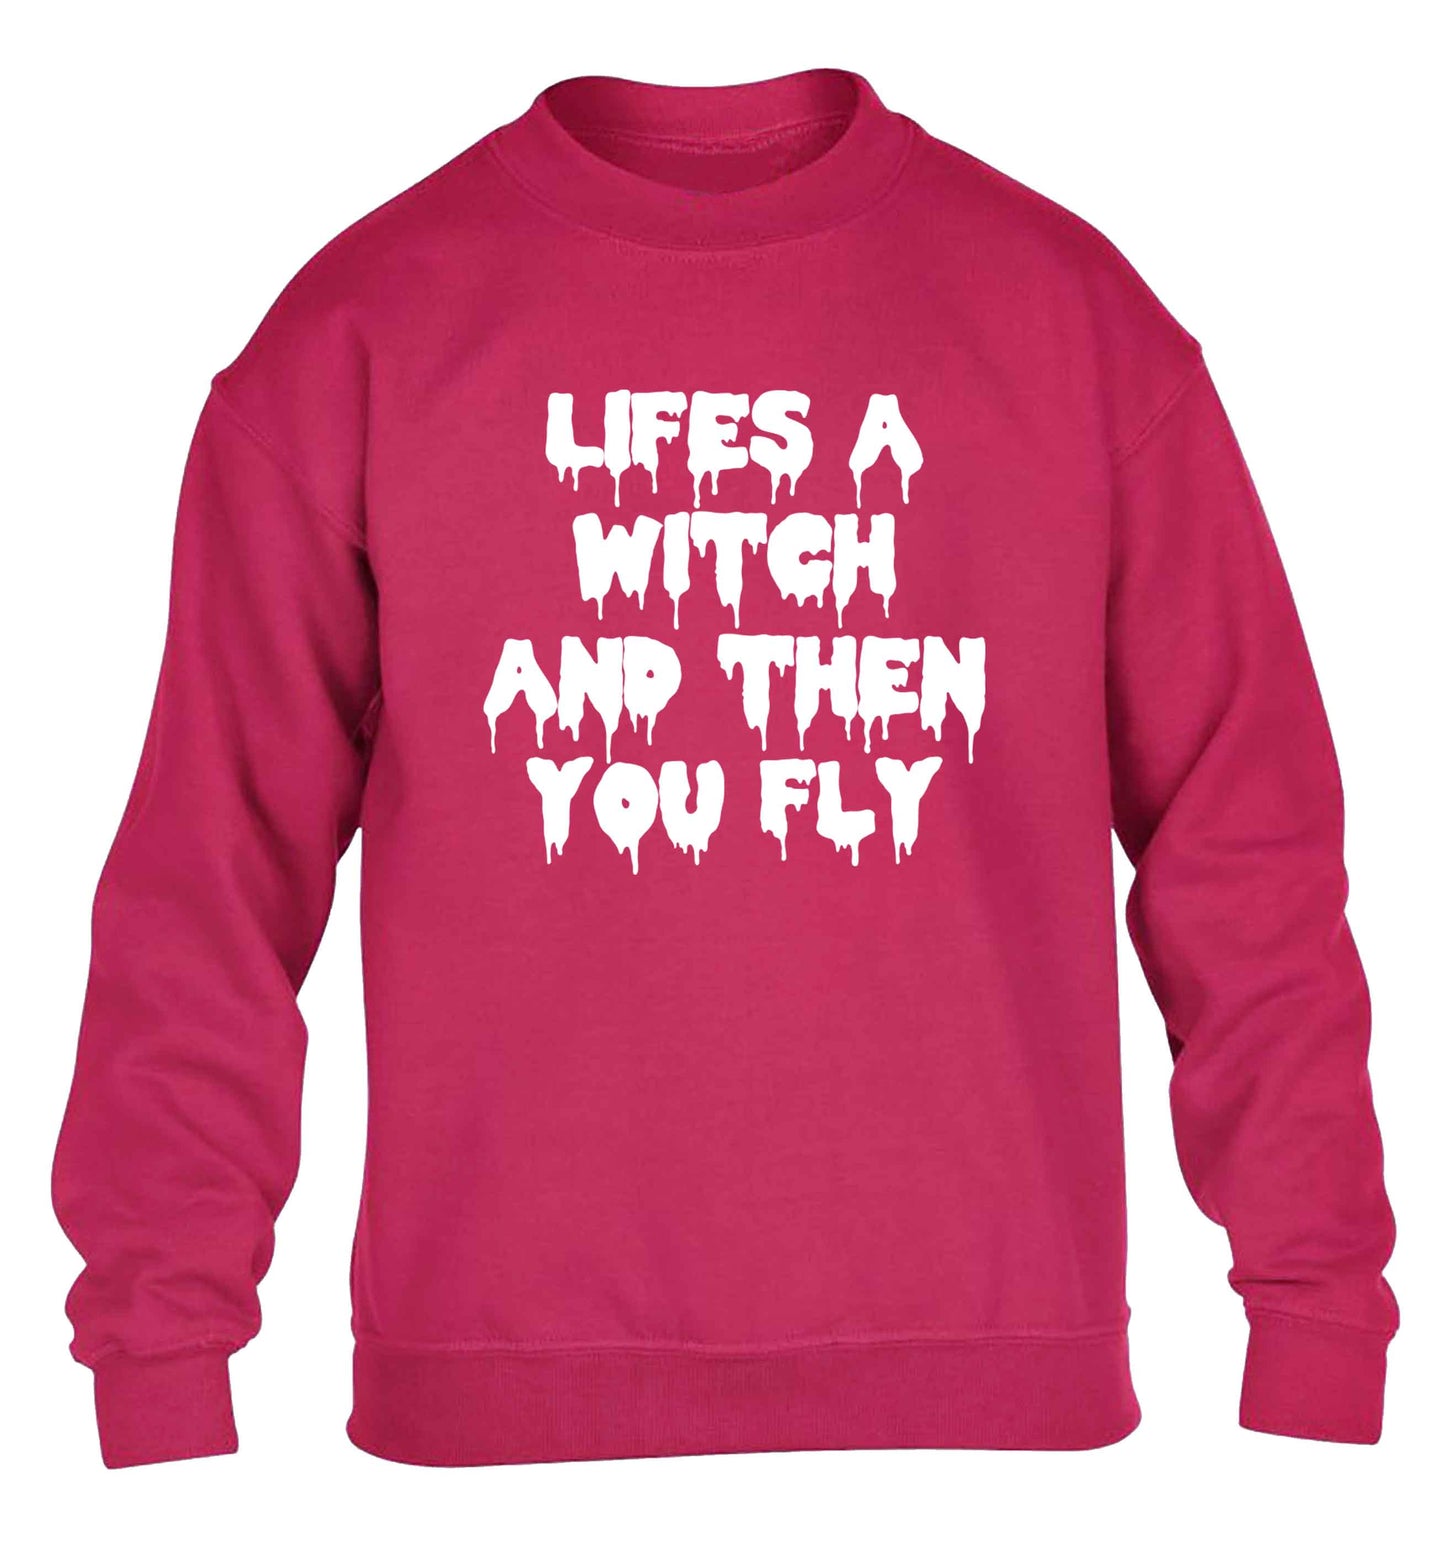 Life's a witch and then you fly children's pink sweater 12-13 Years